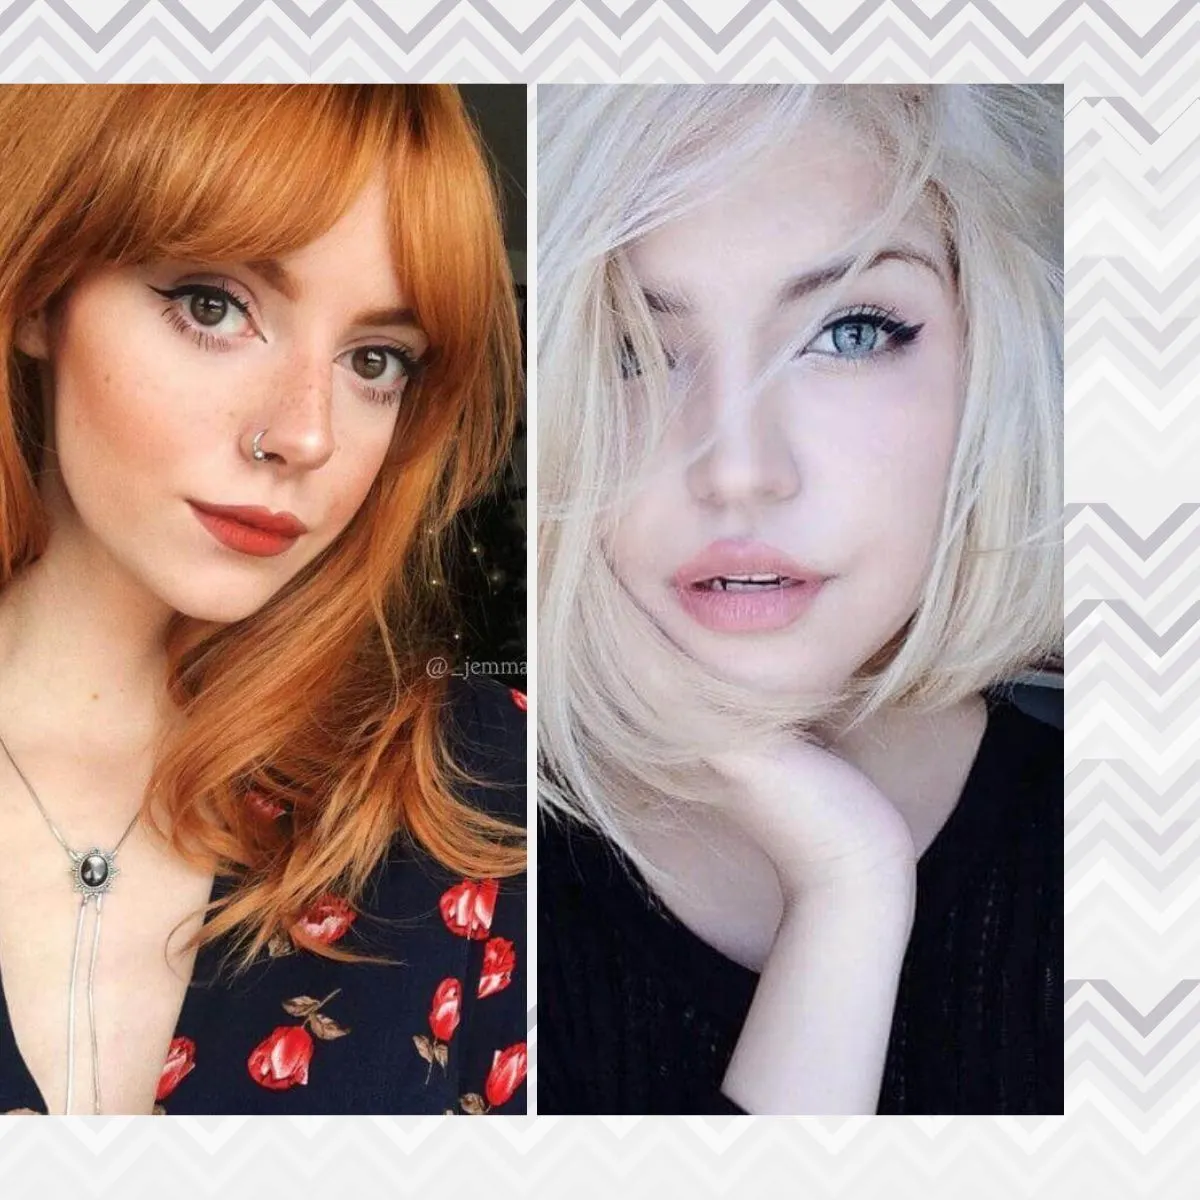 A collage of woman with pale skin. Find out how to choose best hair colors for pale skin.